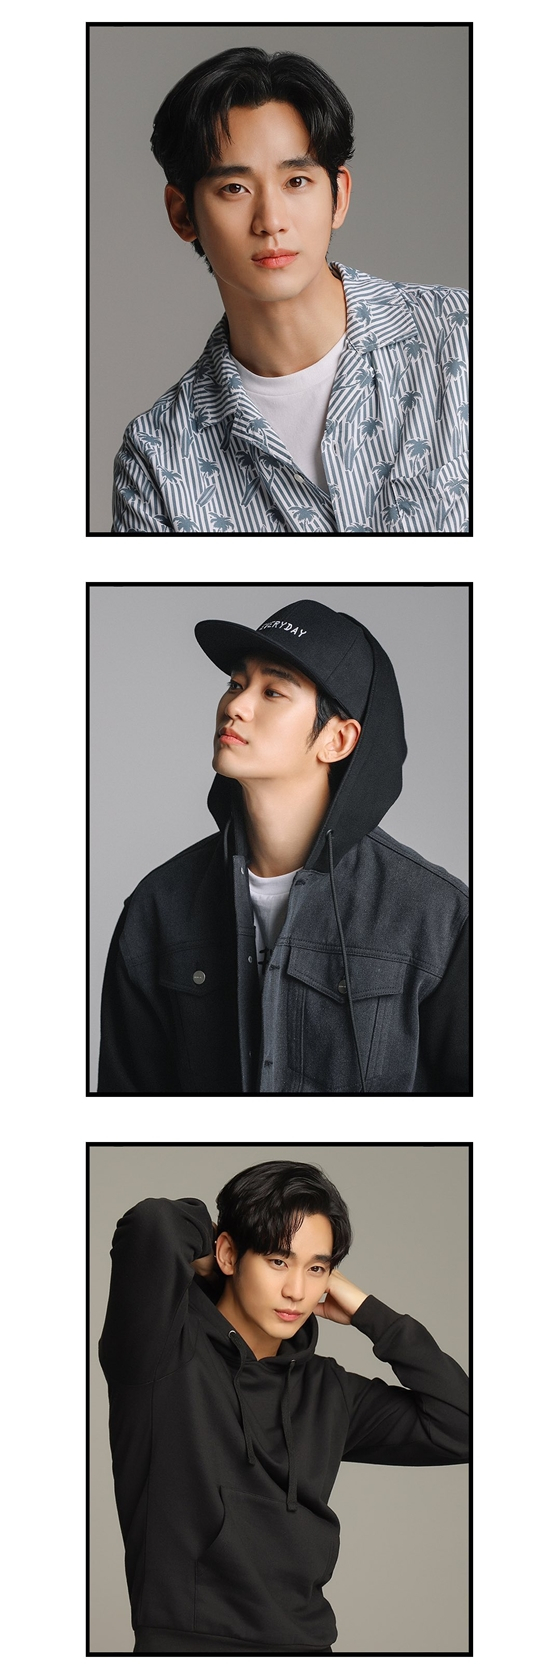 Kim Soo-hyuns agency Gold Medalist posted three photos of Kim Soo-hyun through the official Instagram on the 18th.In the public photos, you can see Kim Soo-hyuns Good-looking Kim. Kim Soo-hyun, who showed the essence of Hoonnam and Good-looking Kim in his hat, hooded T-shirts and shirts.His eyes, which added to the charm of his warm appearance, were enough to capture the fans.Fans who encountered the photos showed various reactions such as good-looking and cool.On the other hand, Kim Soo-hyun is scheduled to meet with fans by playing the role of the main character Kim Hyun-soo Kim the first Coupang play series One Day (director Lee Myung-woo, production green snake media and The Studio M and Gold medalist) to be released in November.One Day is an eight-part hardcore Crime Drama depicting the fierce survival of Kim Hyun-soo (Kim Soo-hyun), who became a suspect in a night-long murder in an ordinary college student, and a low-level third-class lawyer, Shin Jung-han (Cha Seung-won), who does not ask the truth.